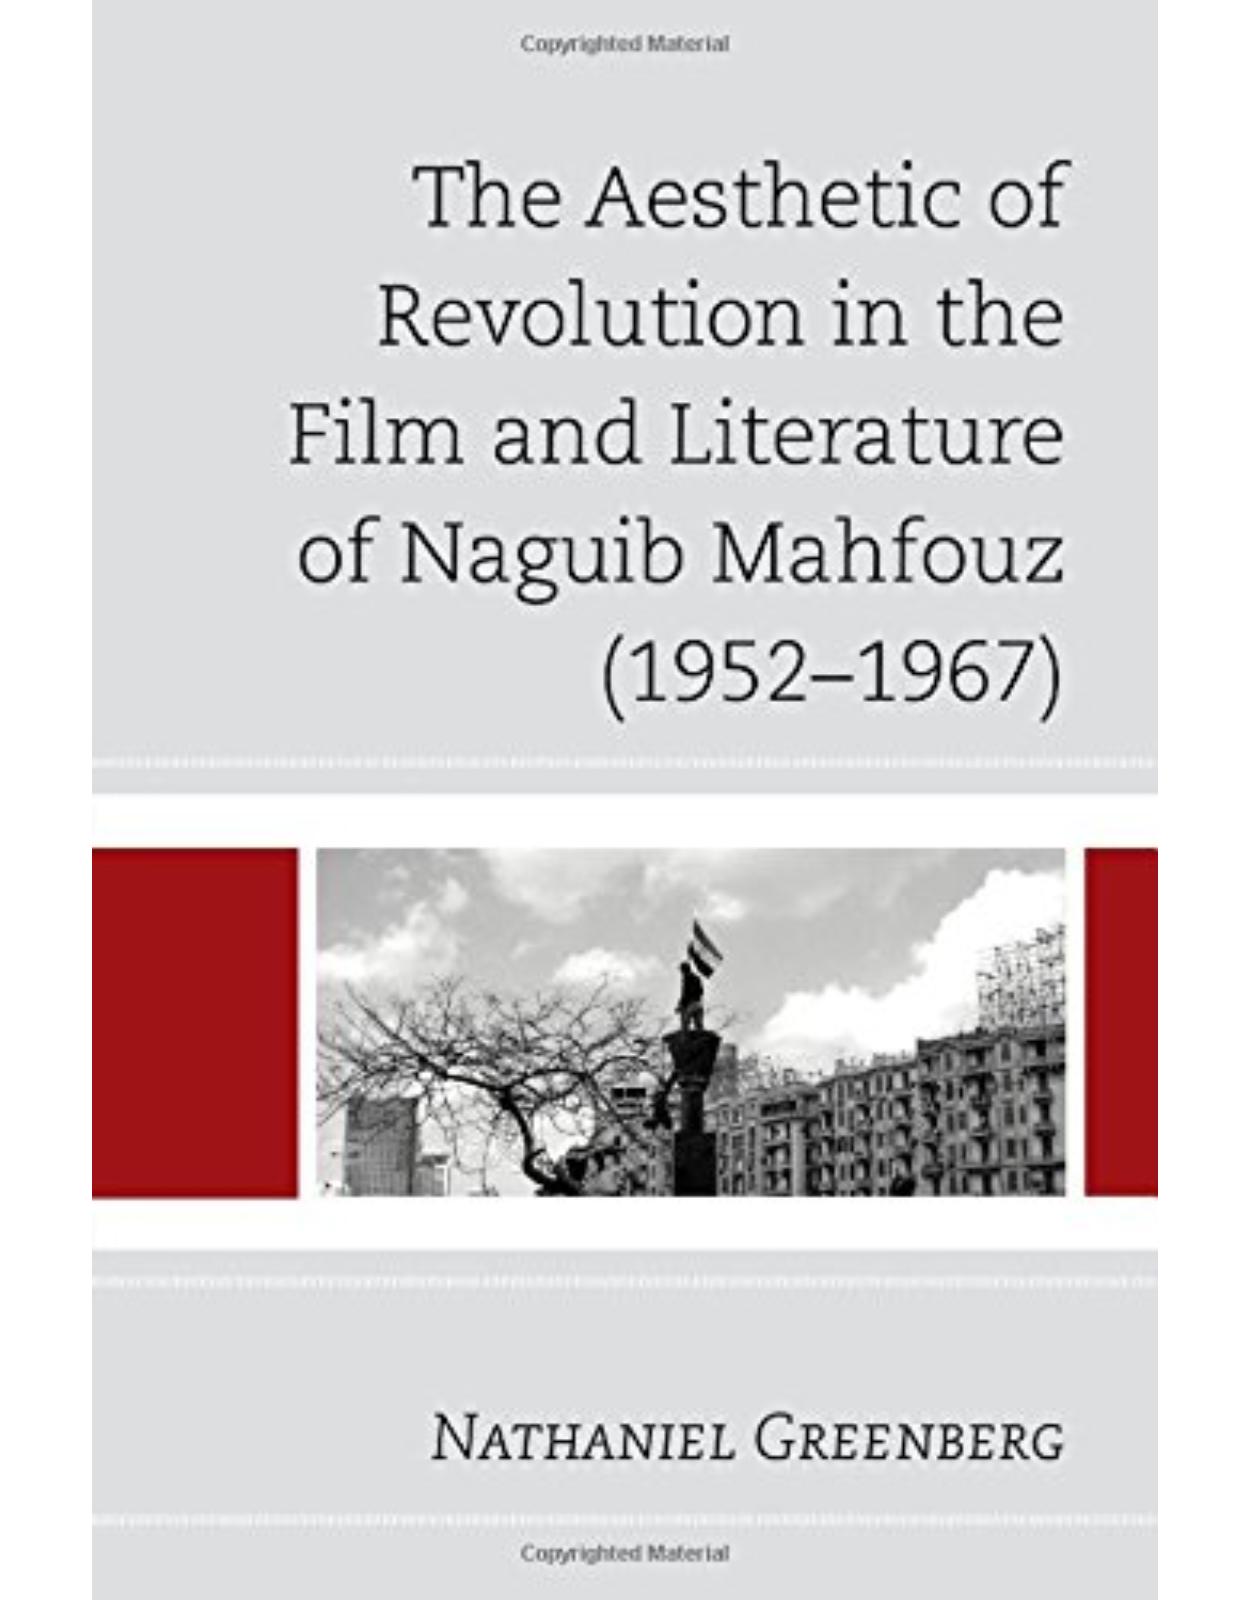 The Aesthetic of Revolution in the Film and Literature of Naguib Mahfouz (1952�1967)